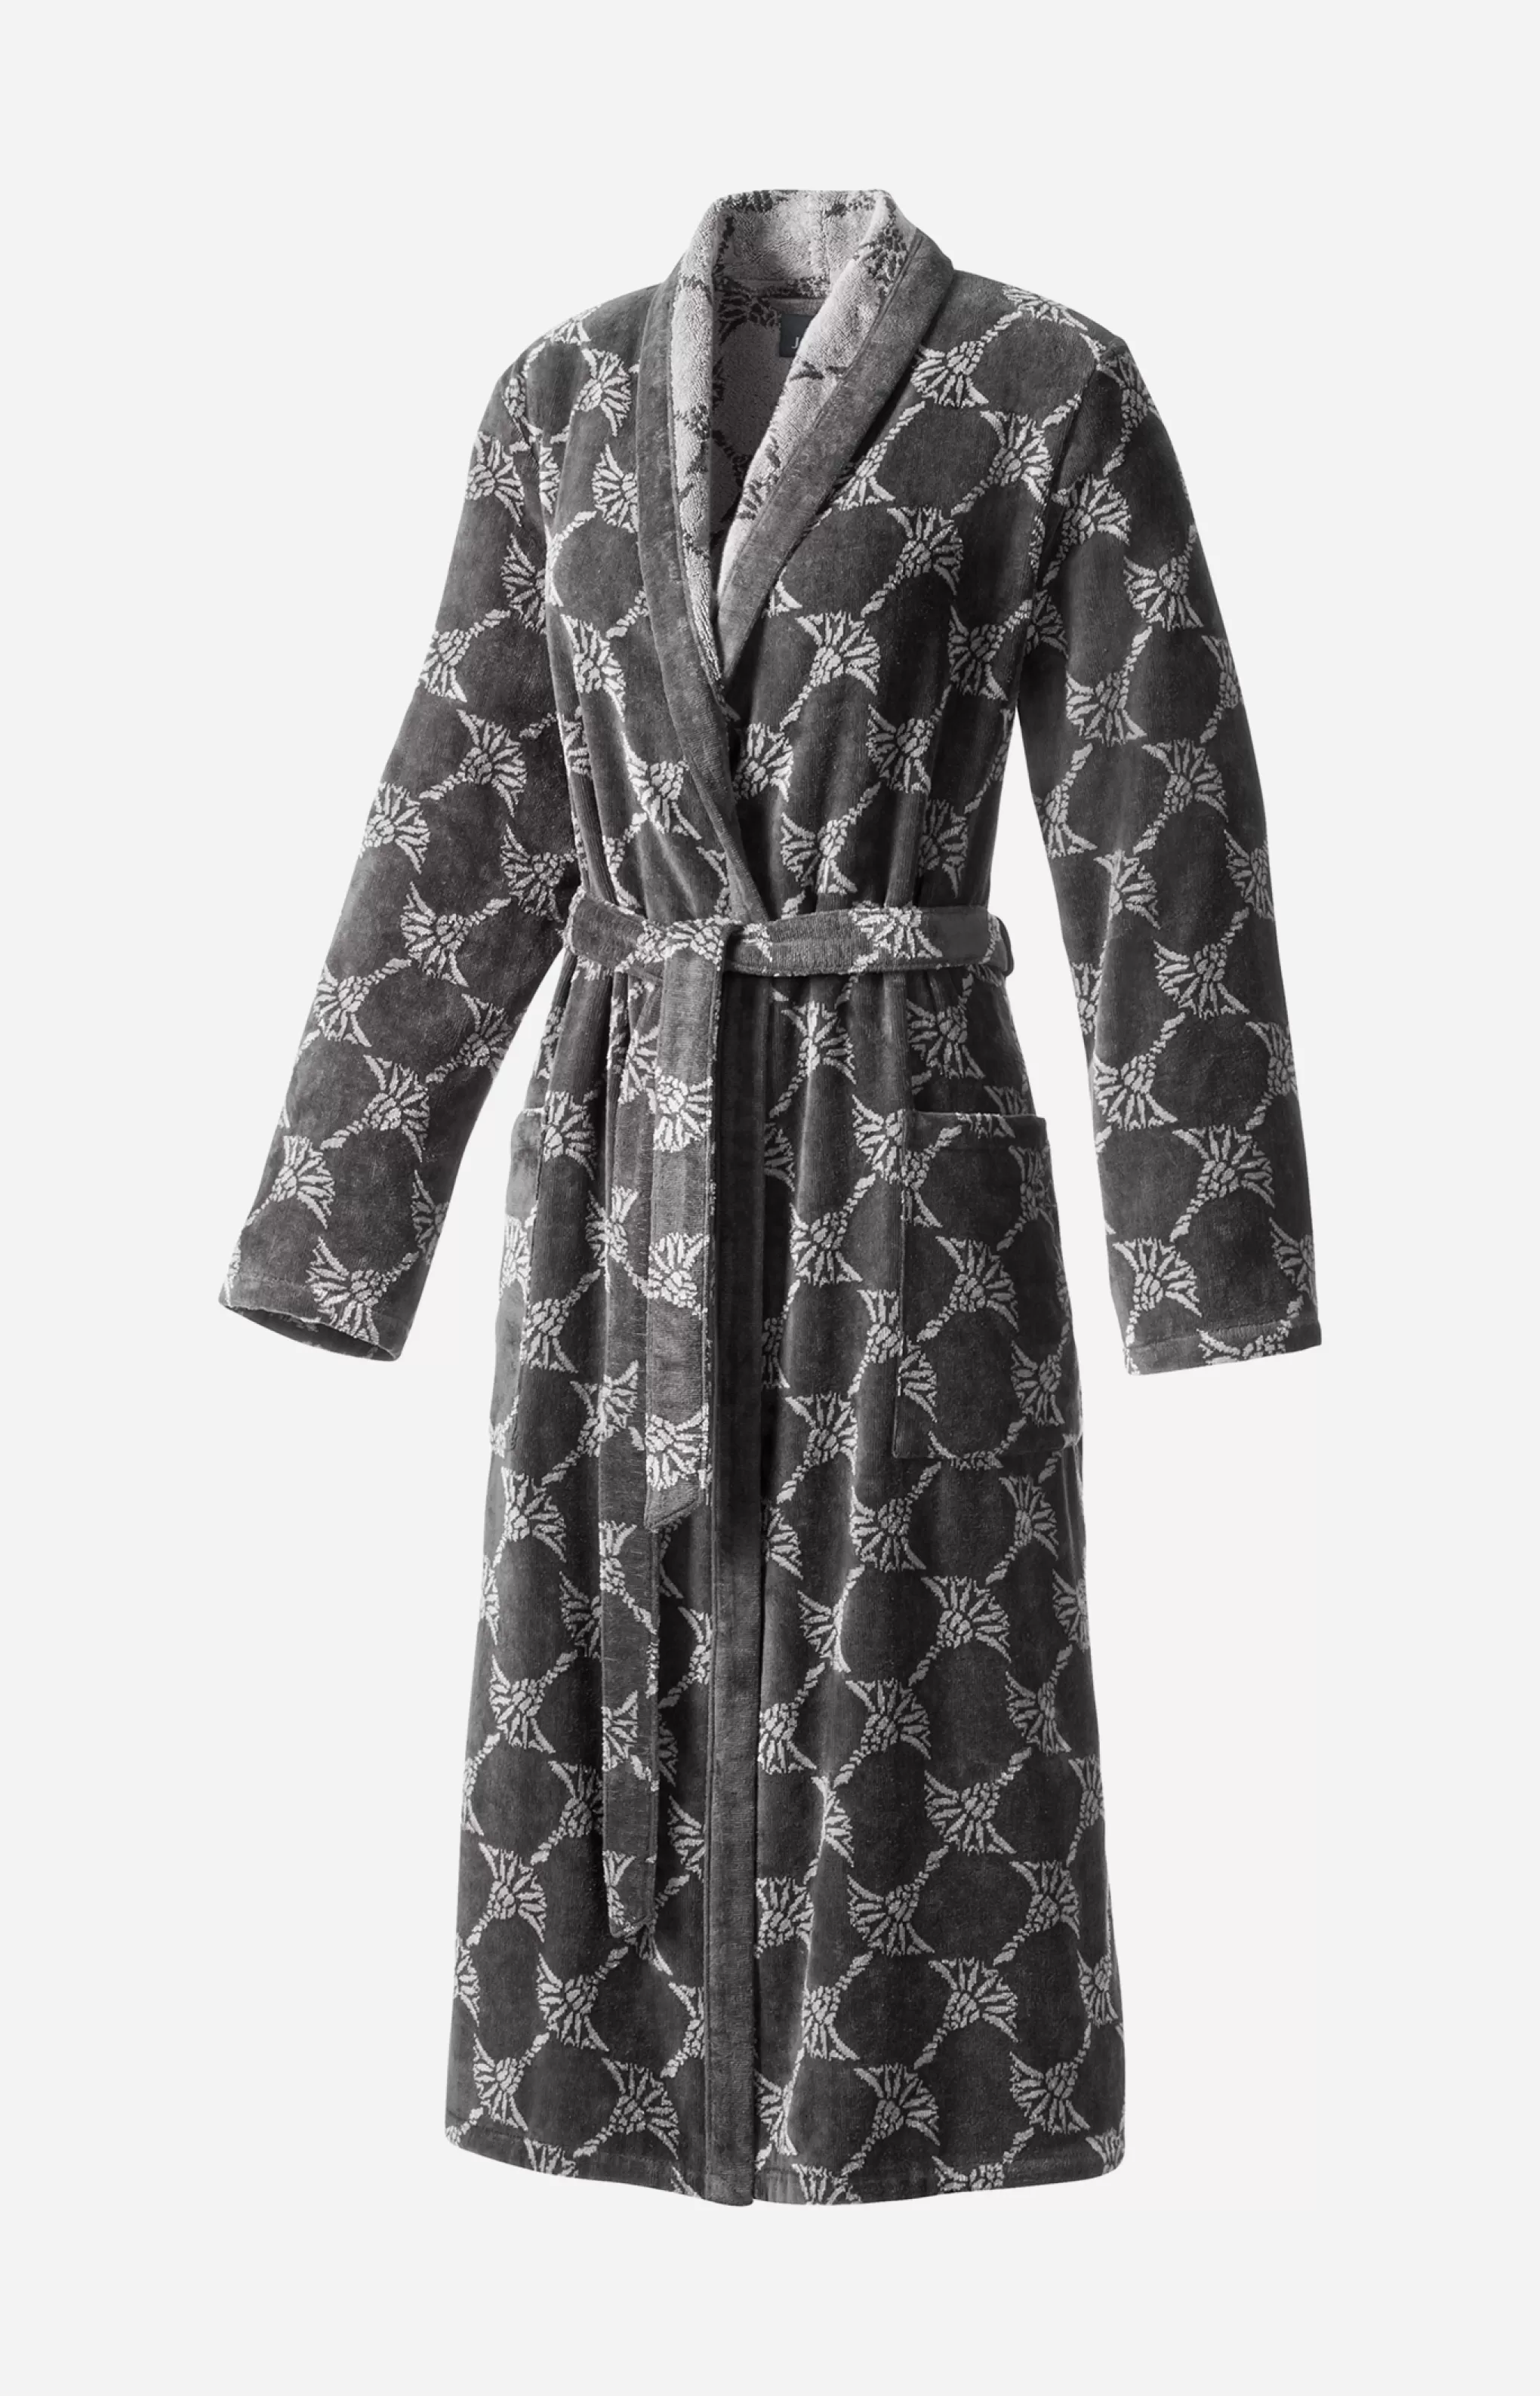 Bathrobes | Discover Everything | Loungewear & Nightwear | Underwear*JOOP Bathrobes | Discover Everything | Loungewear & Nightwear | Underwear Women's Bathrobe in